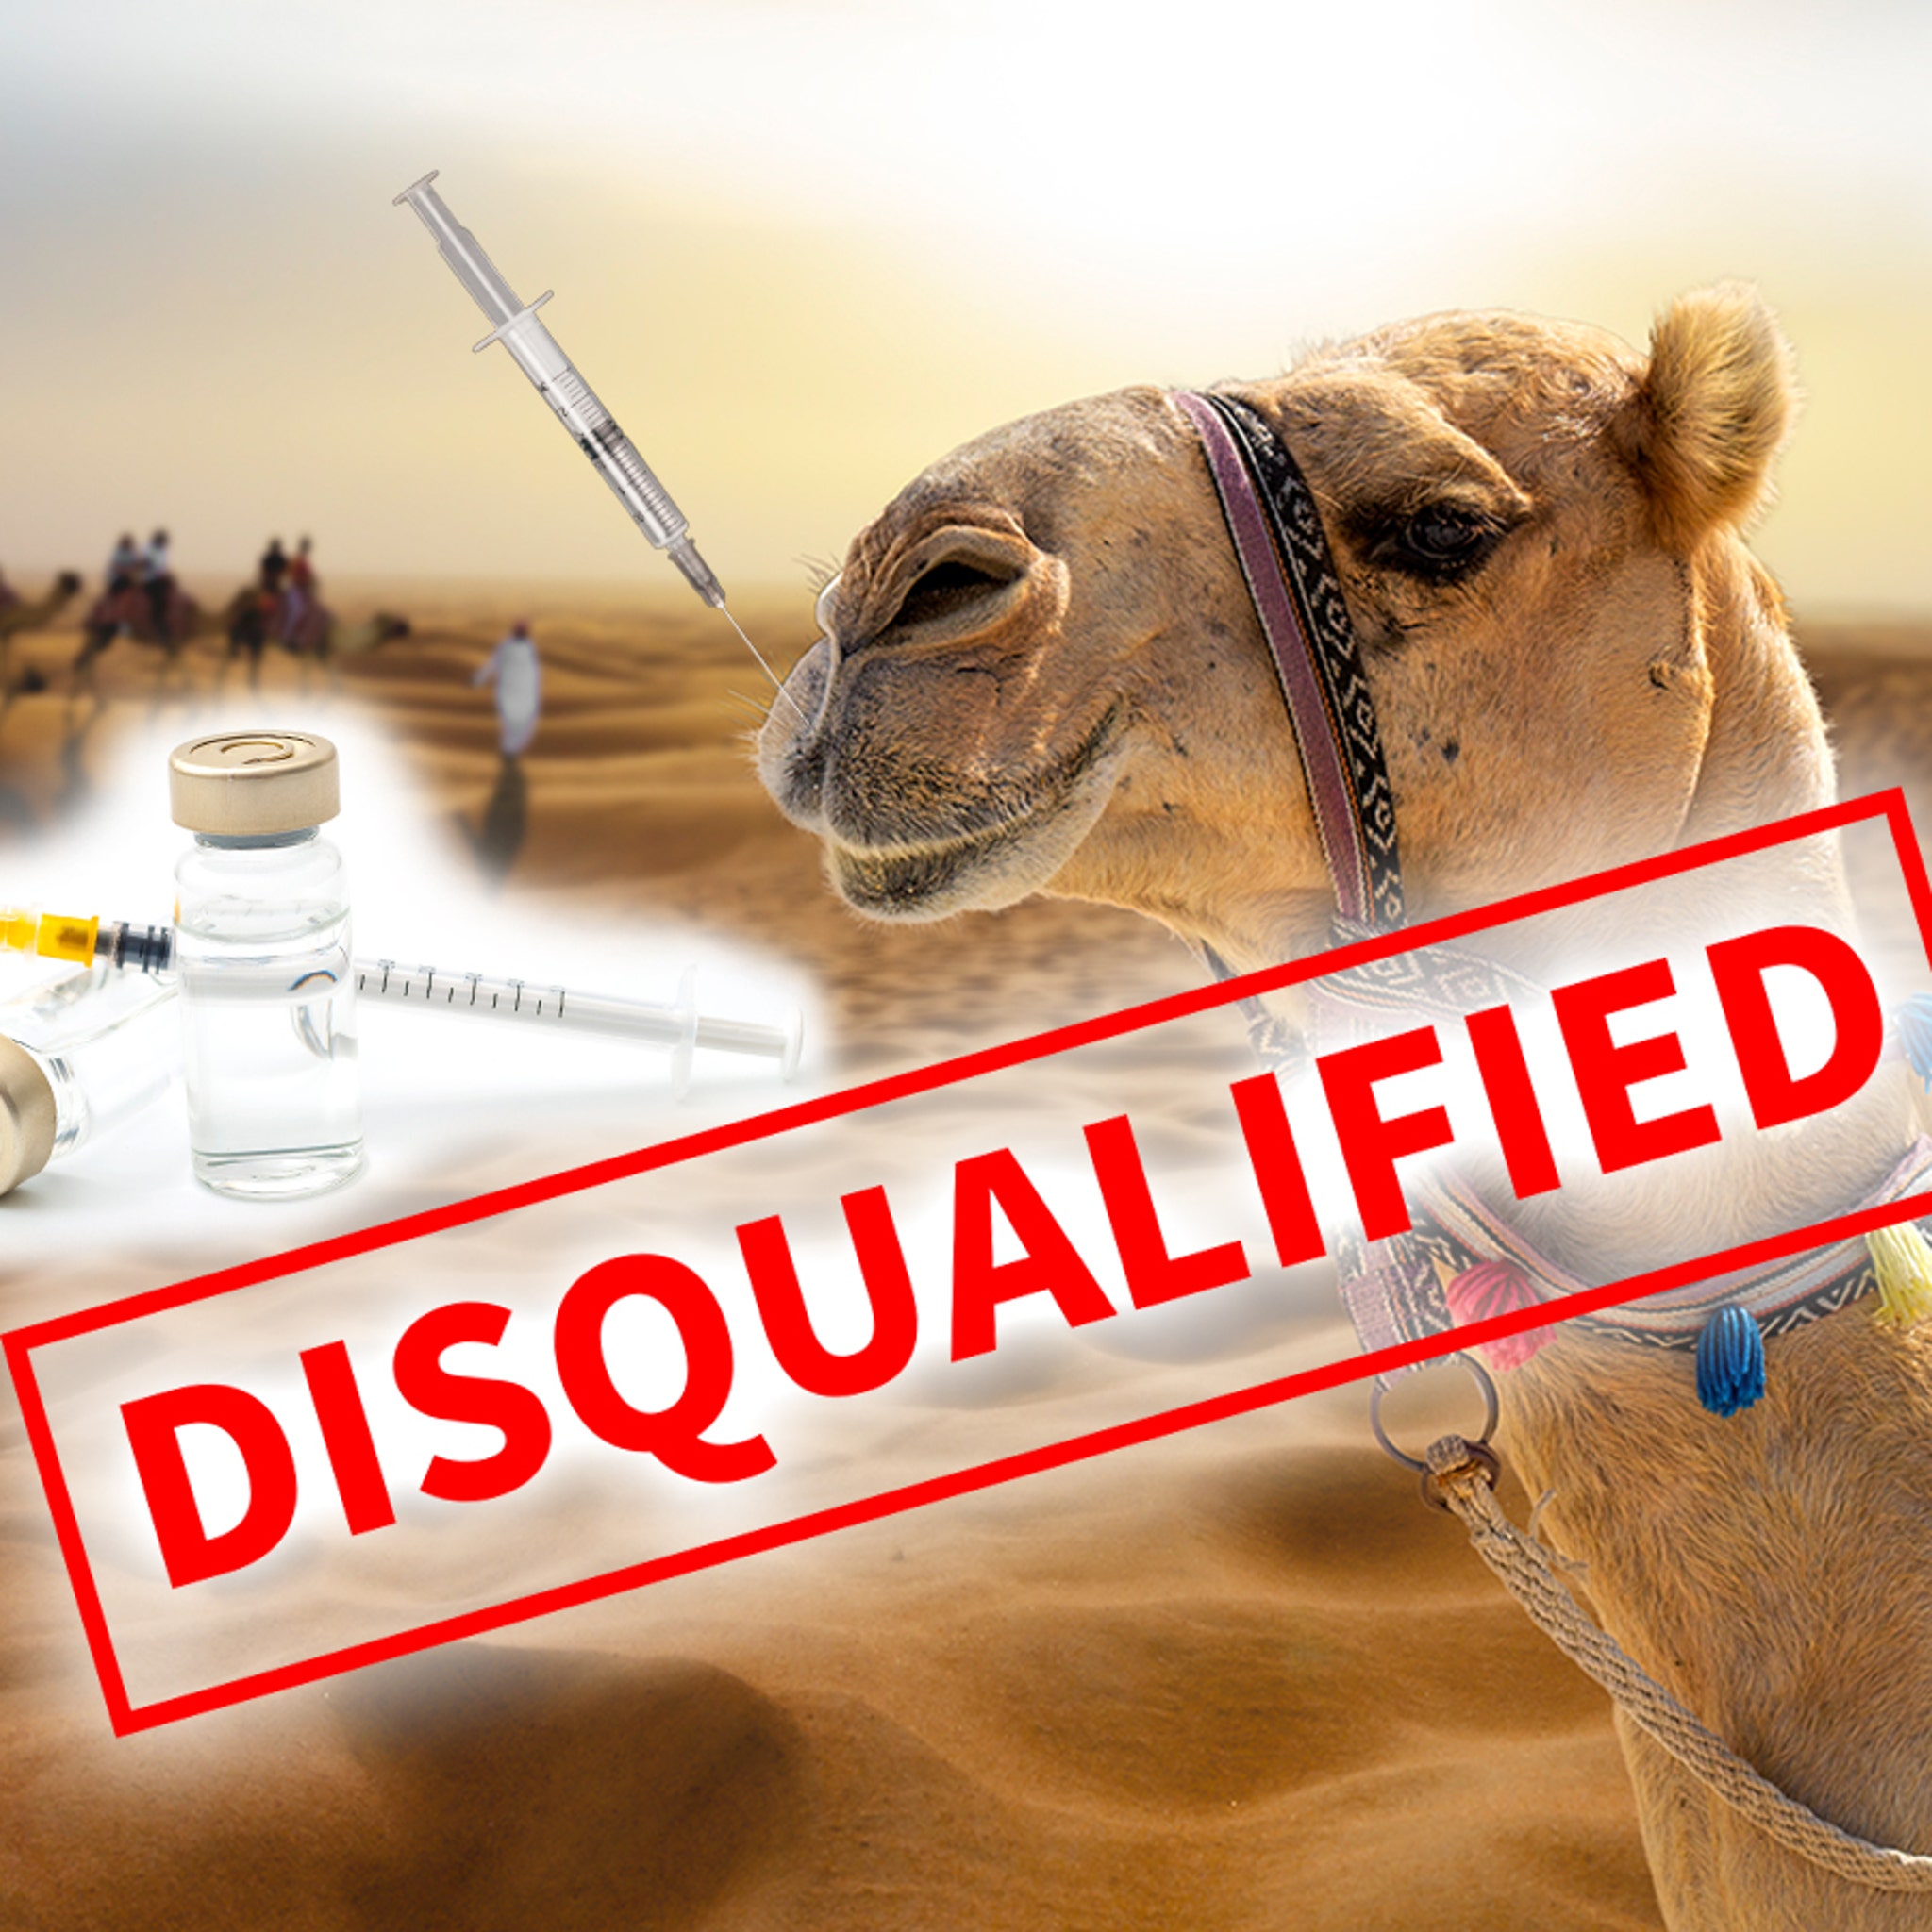 Camel Beauty Pageant Crackdown, 40 Contestants Busted for Botox in Saudi  Arabia